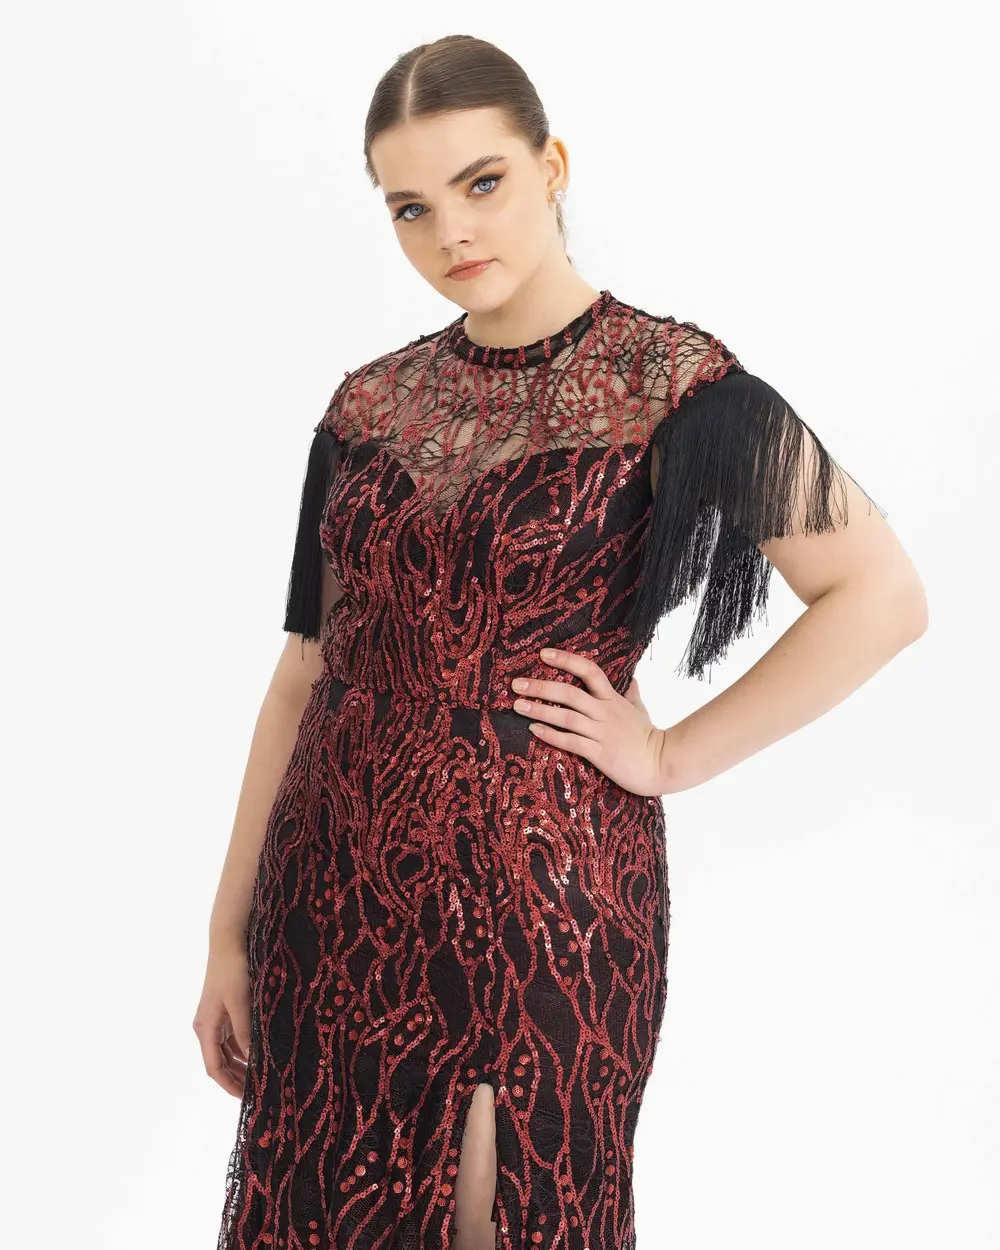 PLUS SIZE FISH FORM SEQUINED EVENING DRESS